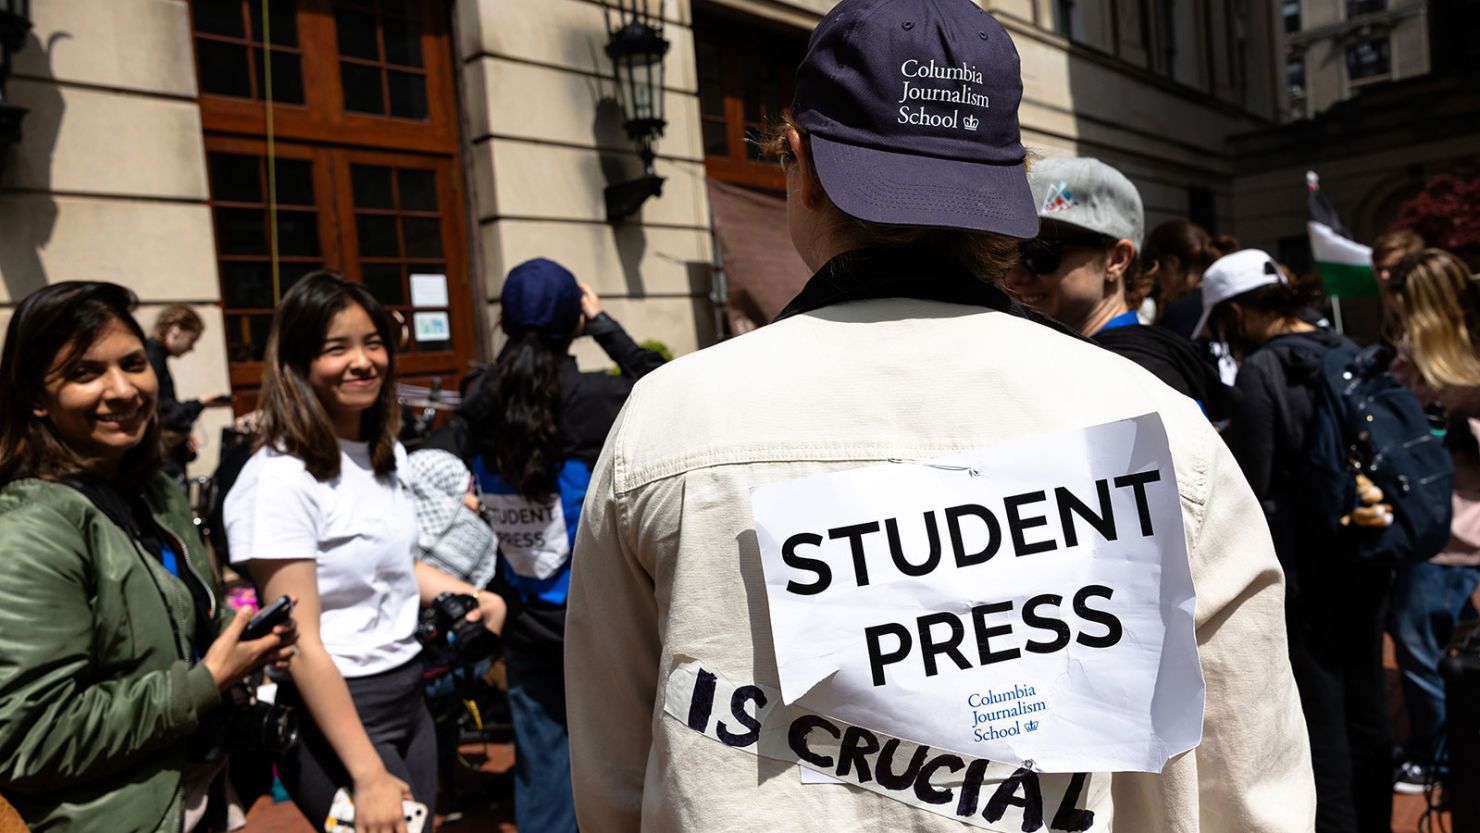 A Columbia Journalism student journalist shows off their sign as they cover the events at Hamilton Hall at Columbia University on April 30, 2024 in New York City.